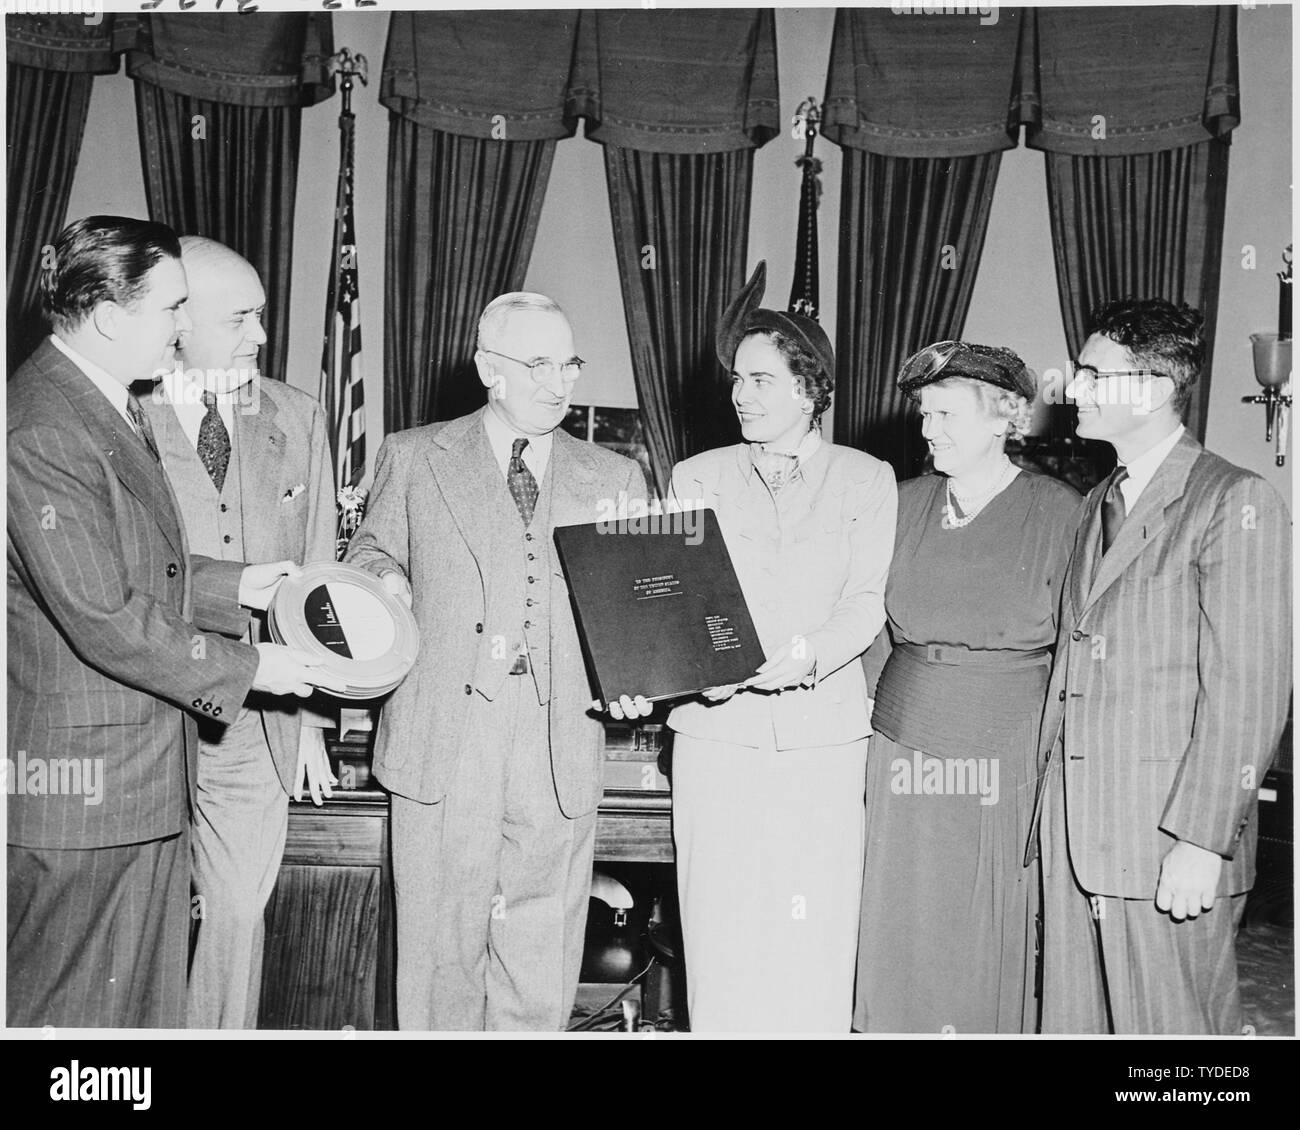 Photograph of President Truman in the Oval Office, receiving a report to the nation on the work of the United Nations International Children's Emergency Fund (UNICEF), prepared by the United States Committee for UNICEF; (from left to right) Under Secretary of State James Webb; Secretary of Defense Louis Johnson; the President; Mrs. Mary Lord, chairman of the U.S. Committee for UNICEF; Miss Katharine Lenroot, chief of the Children's Bureau and U.S. delegate to UNICEF; and Dallas Dort, Special Assistant to the Assistant Secretary of State for Economic Affairs. Stock Photo